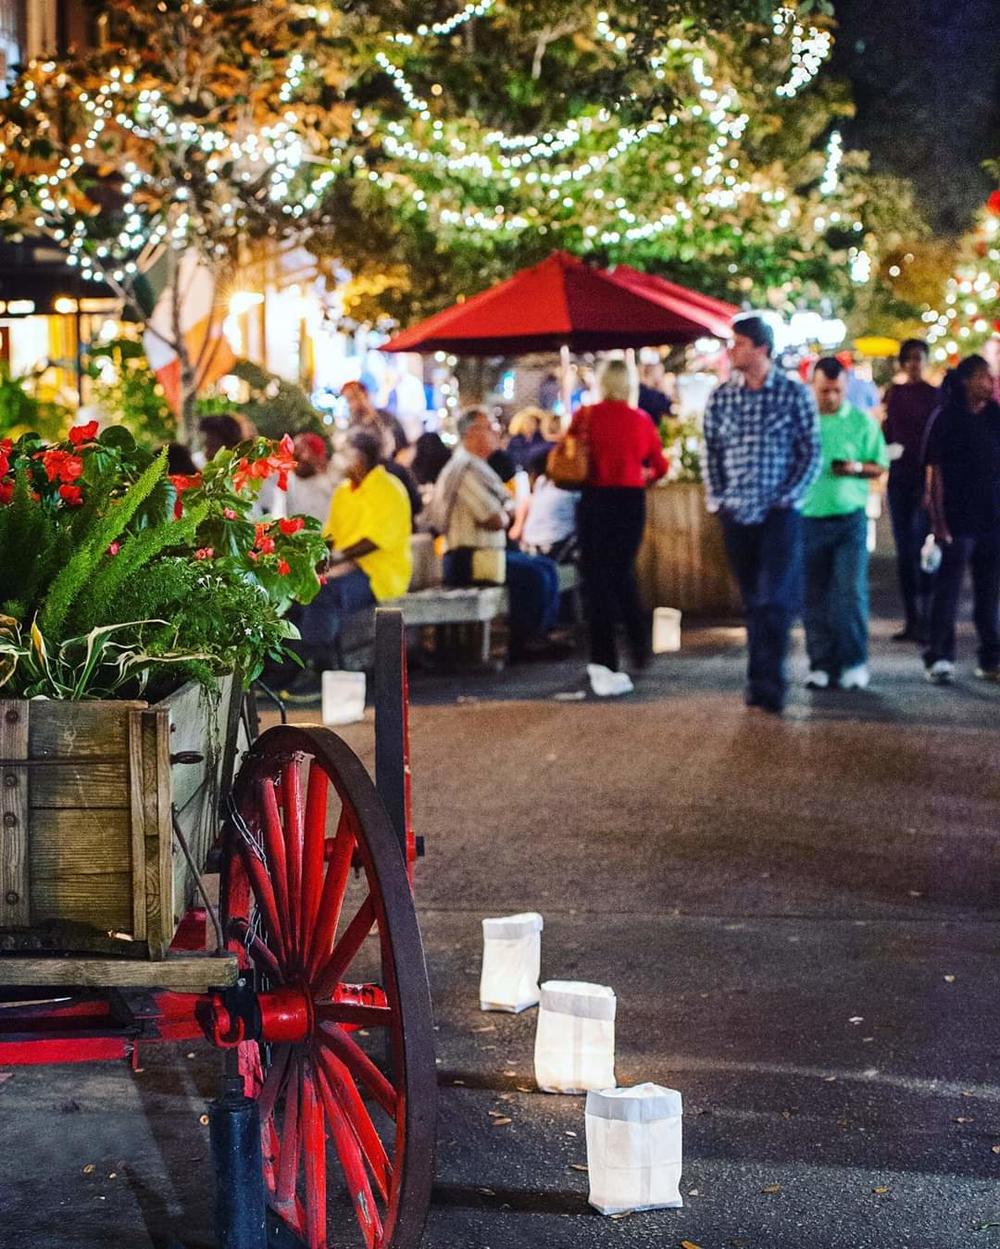 It's all about the holidays in Savannah this weekend, with events downtown, on Tybee and beyond.